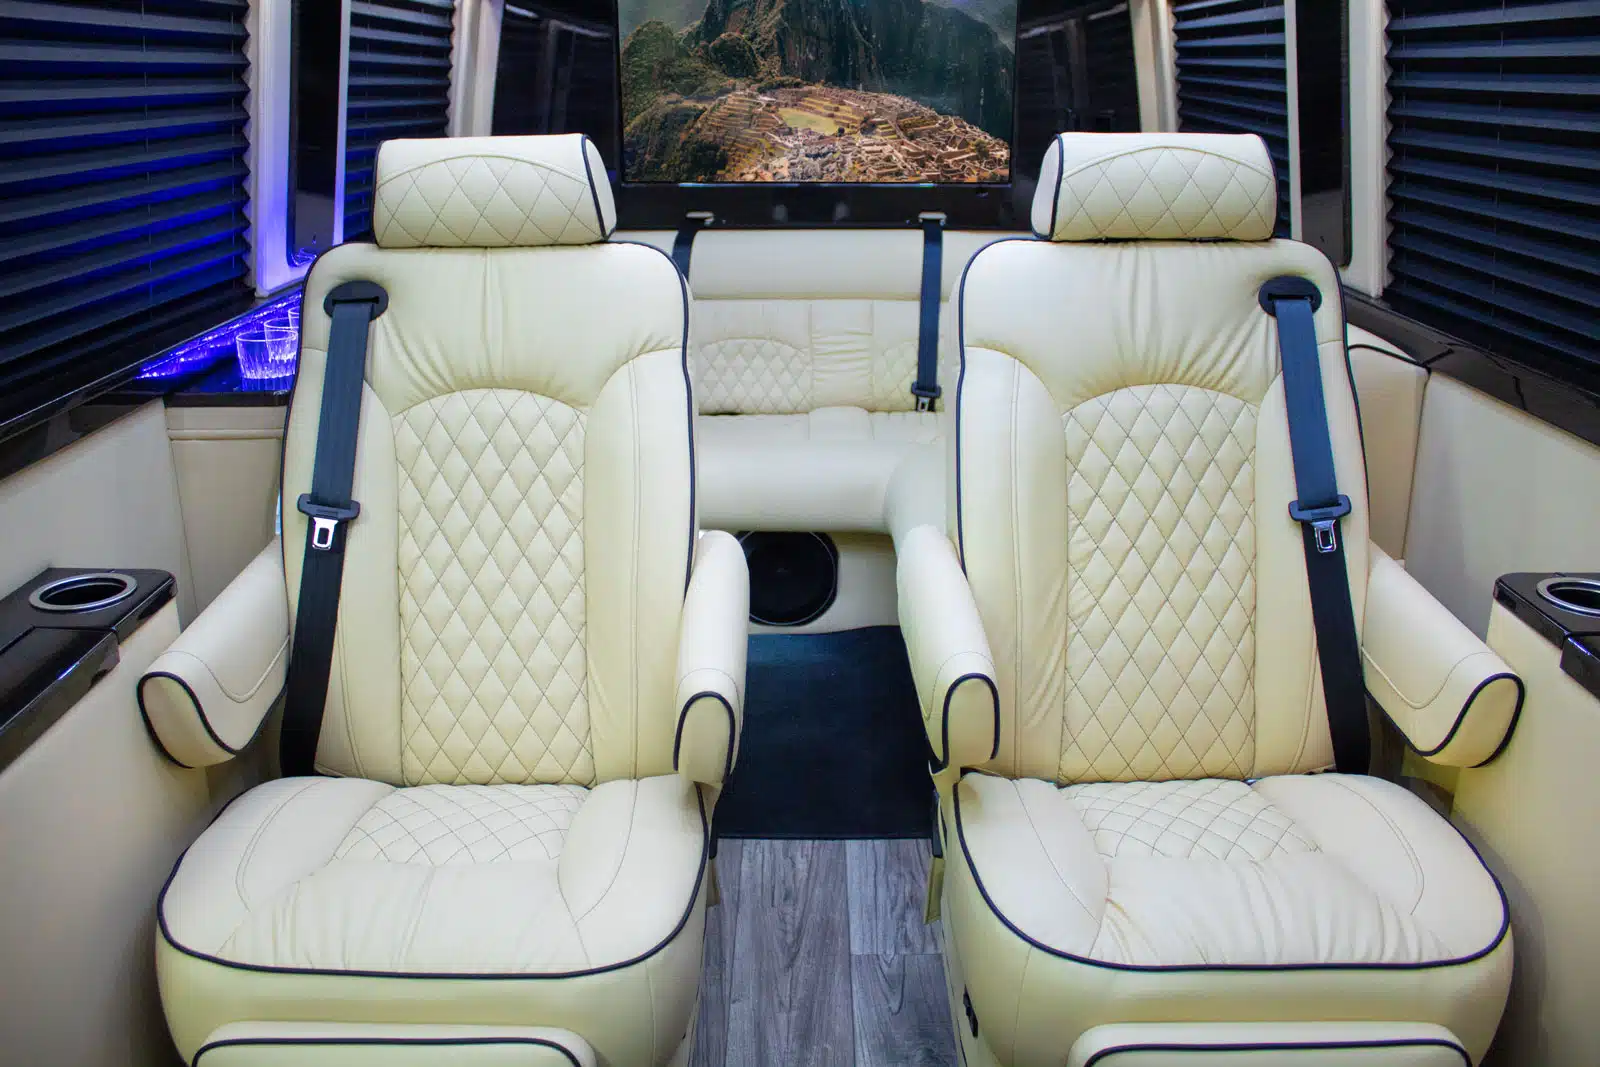 Ultimate Limo interior captain's chairs